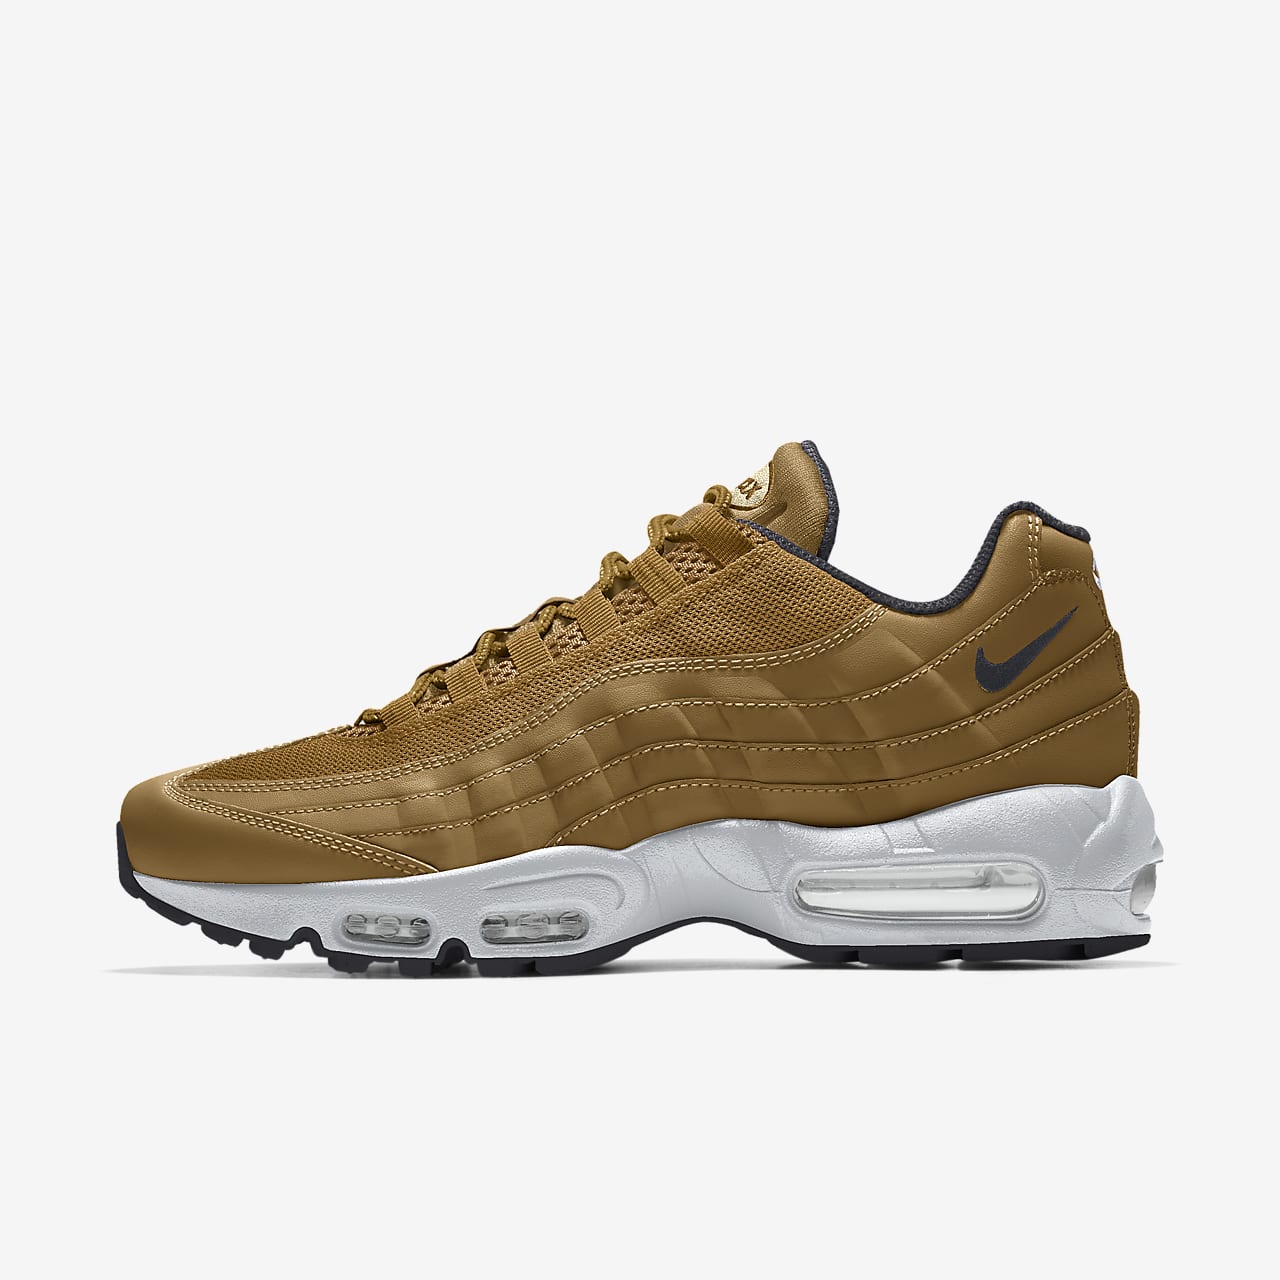 Chaussure personnalisable Nike Air Max 95 By You pour Femme